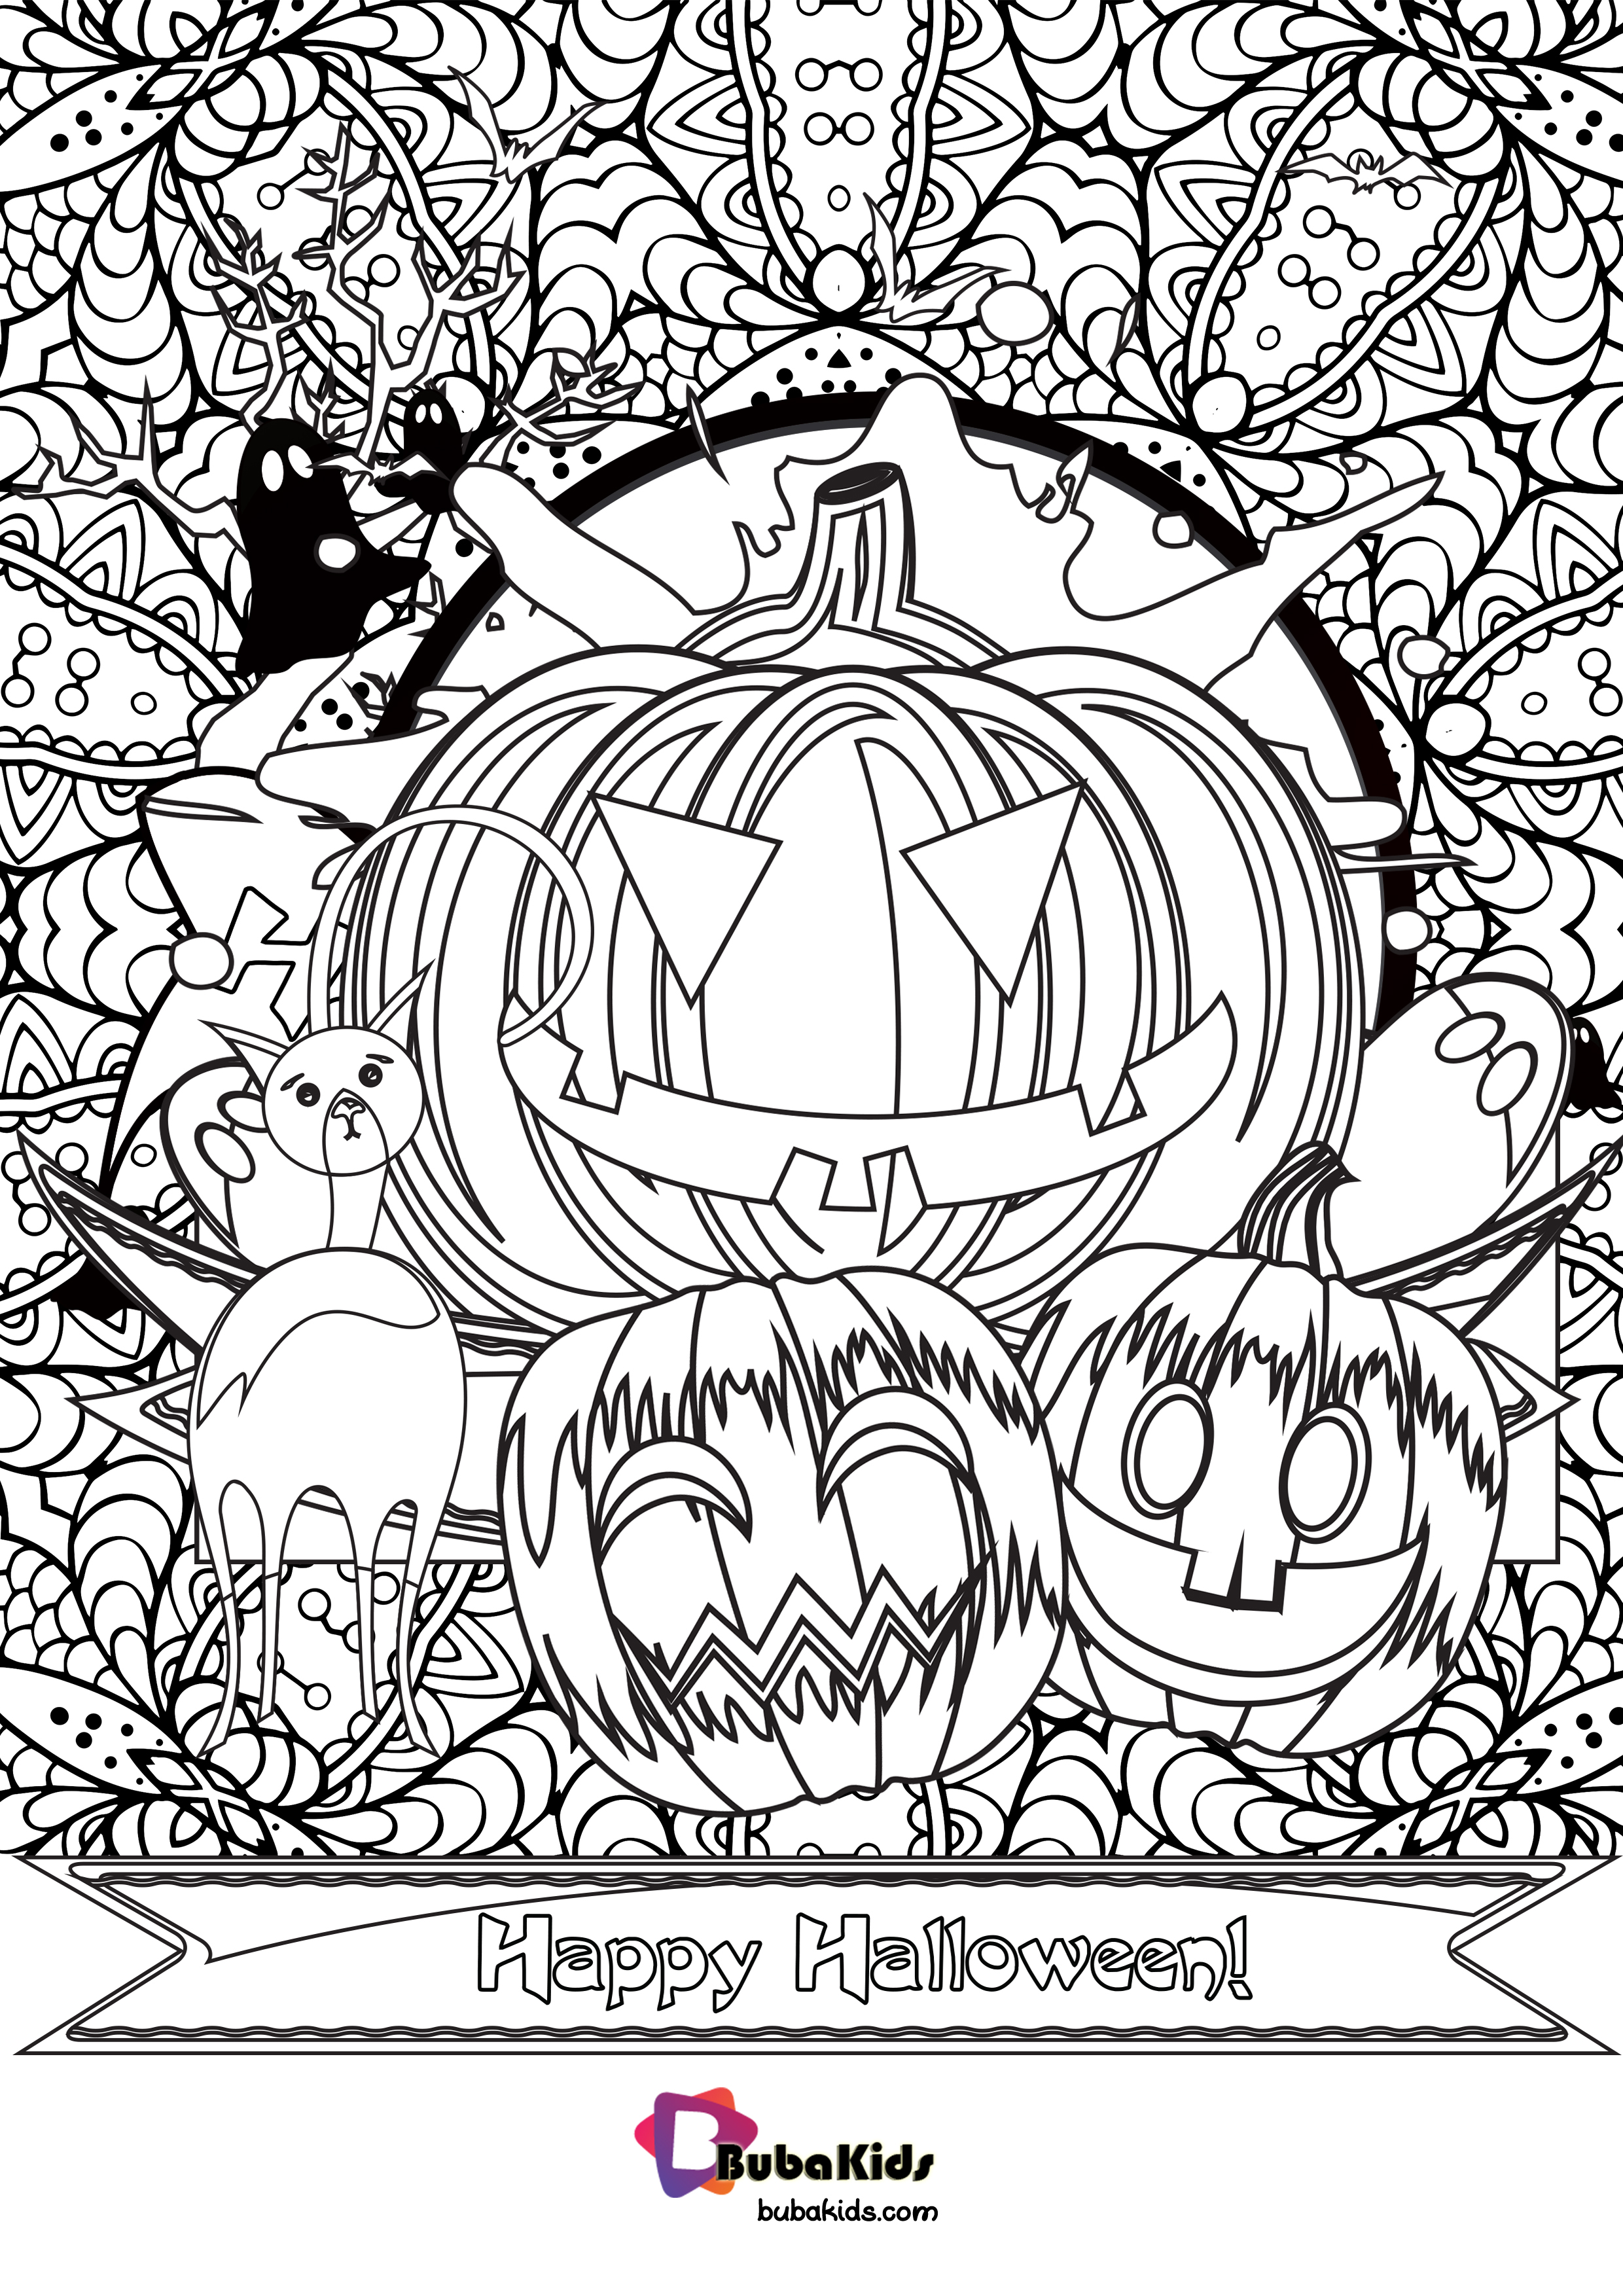 Happy Halloween Pumpkin and Cat Coloring Page Wallpaper